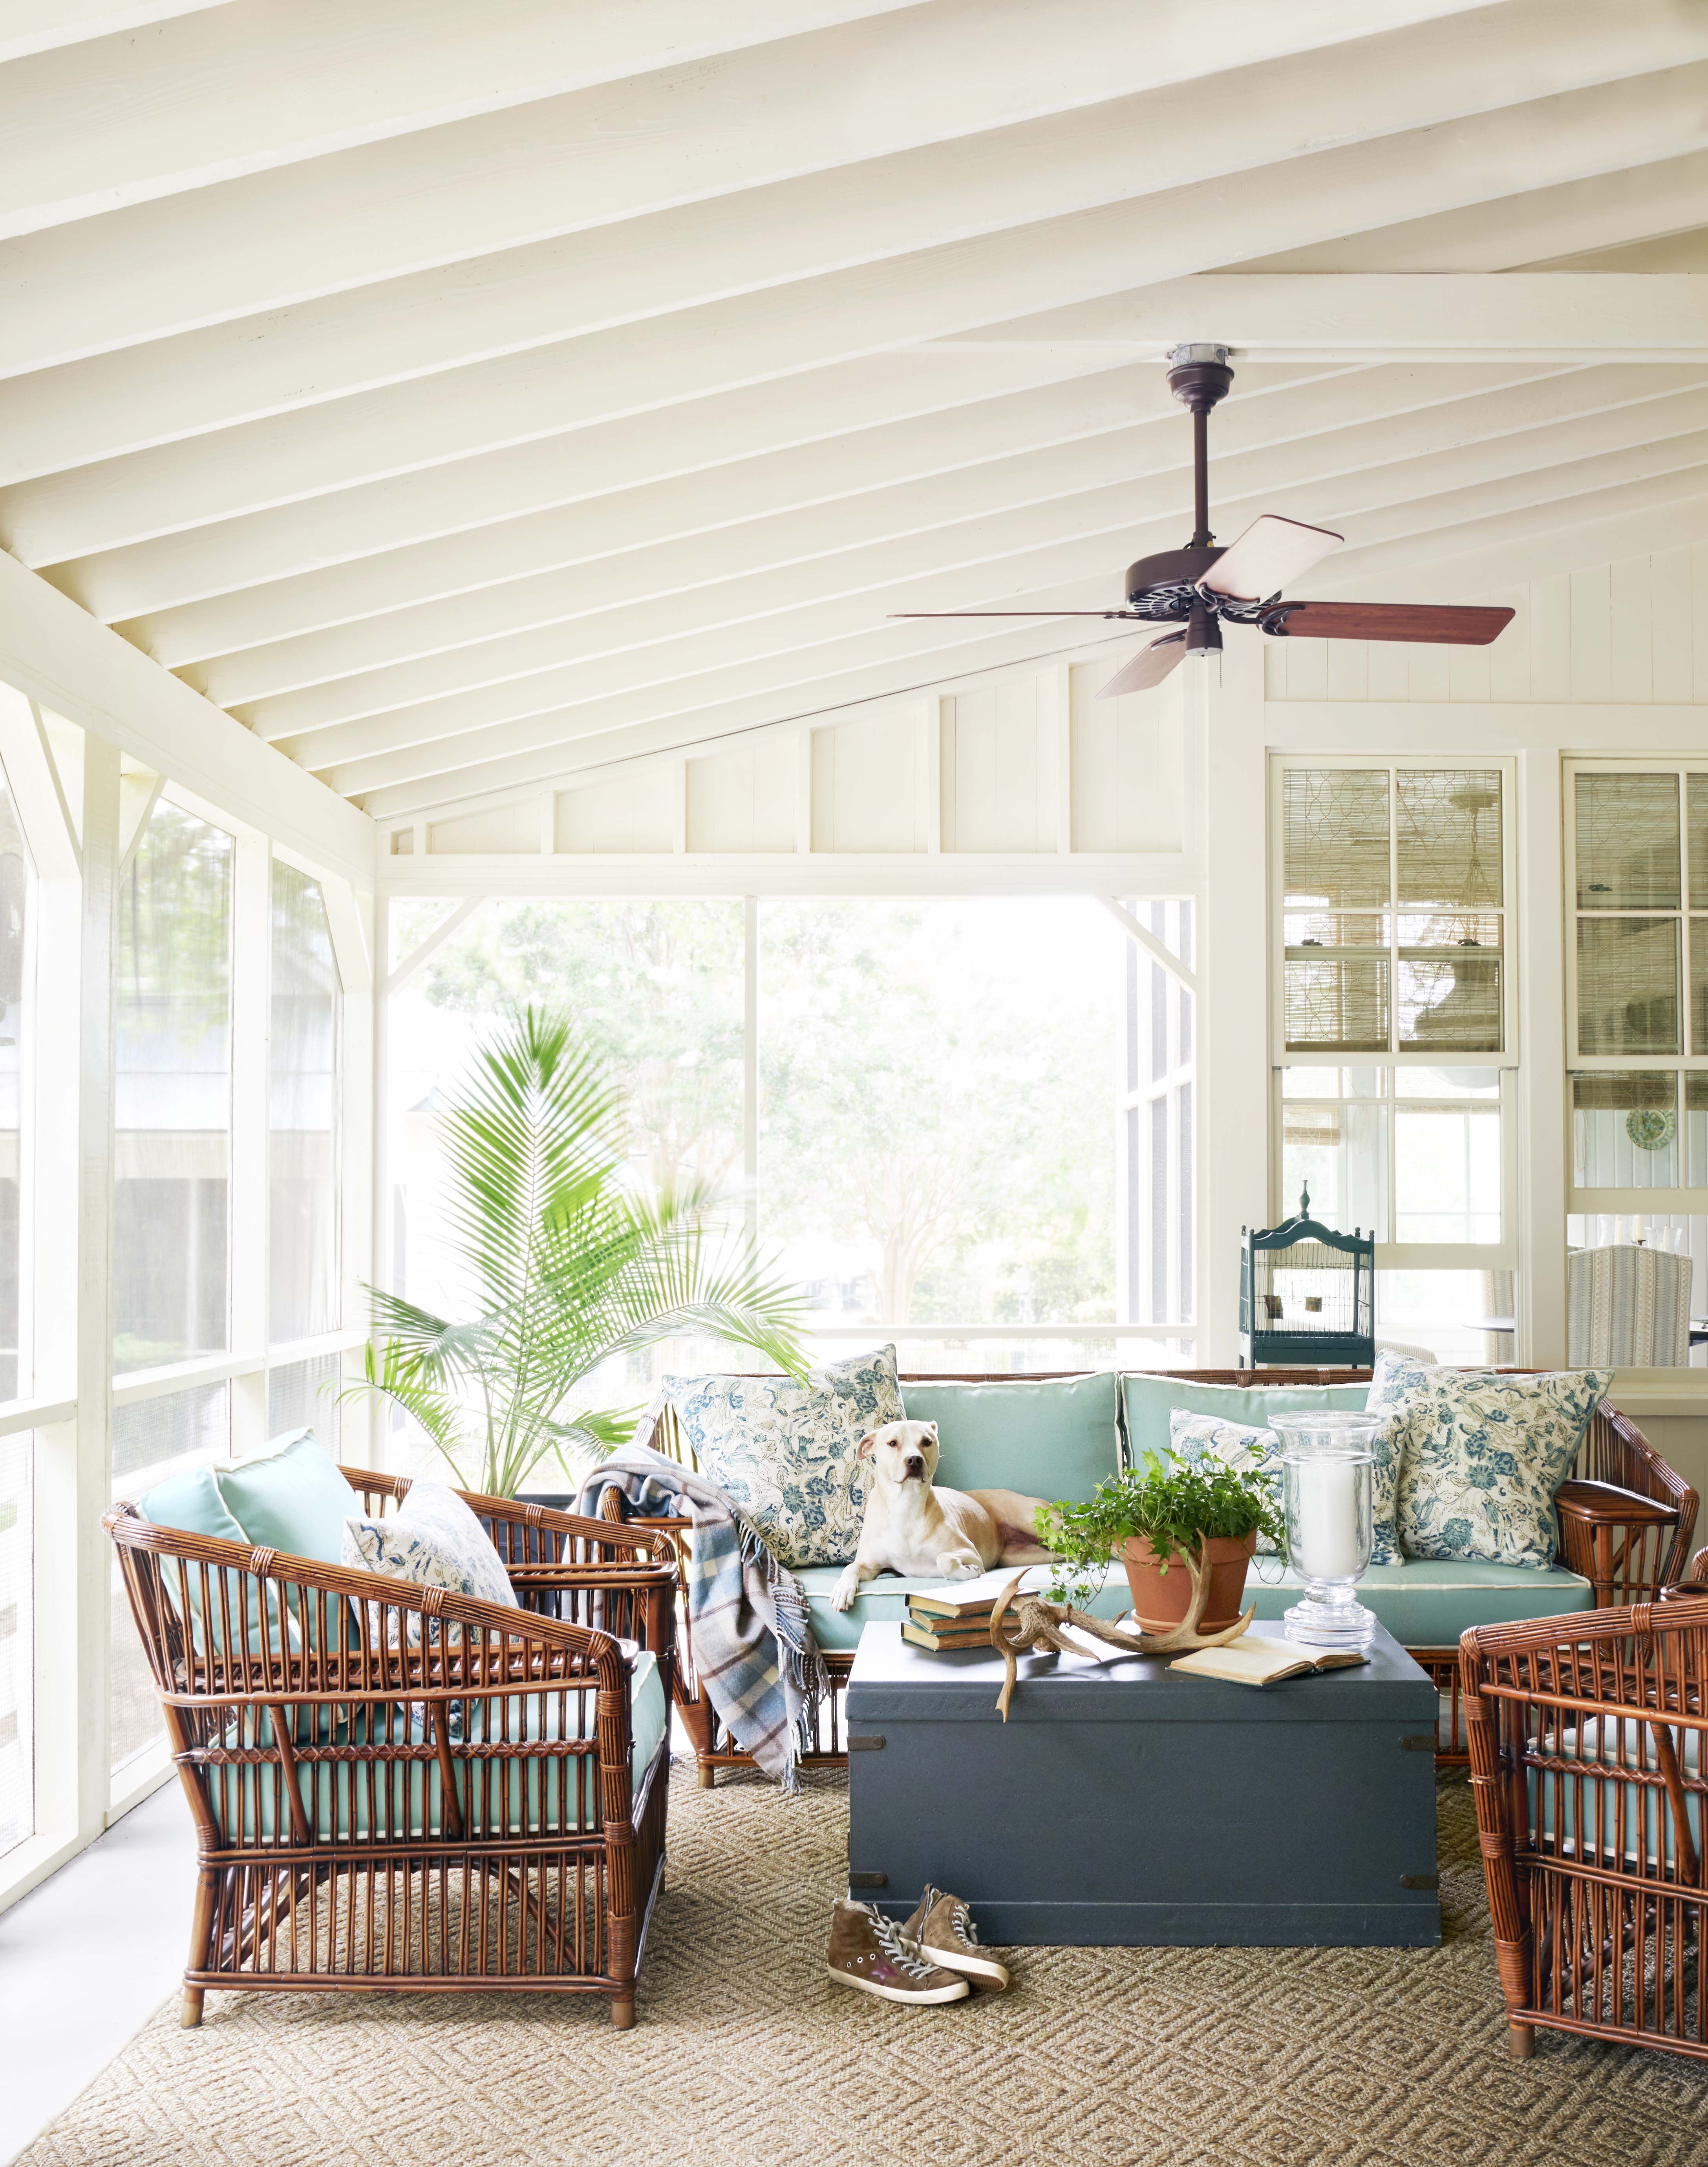 60 Charming Front Porch Ideas - Porch Design and Decorating Tips